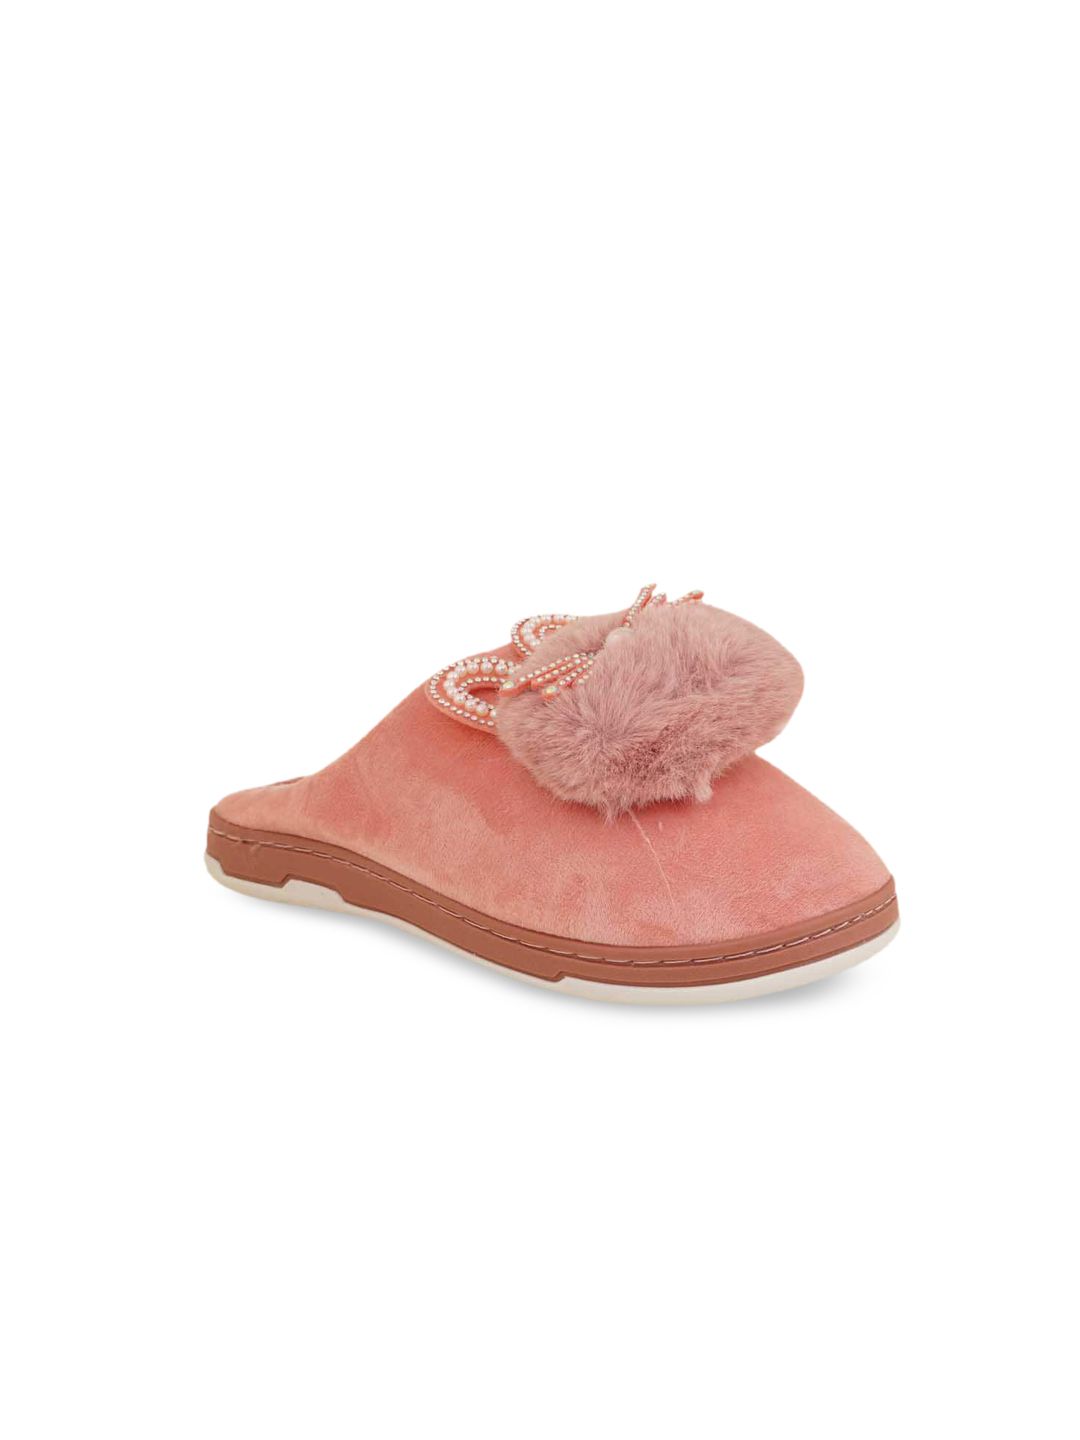 Walkfree Women Peach-Coloured Room Slippers Price in India